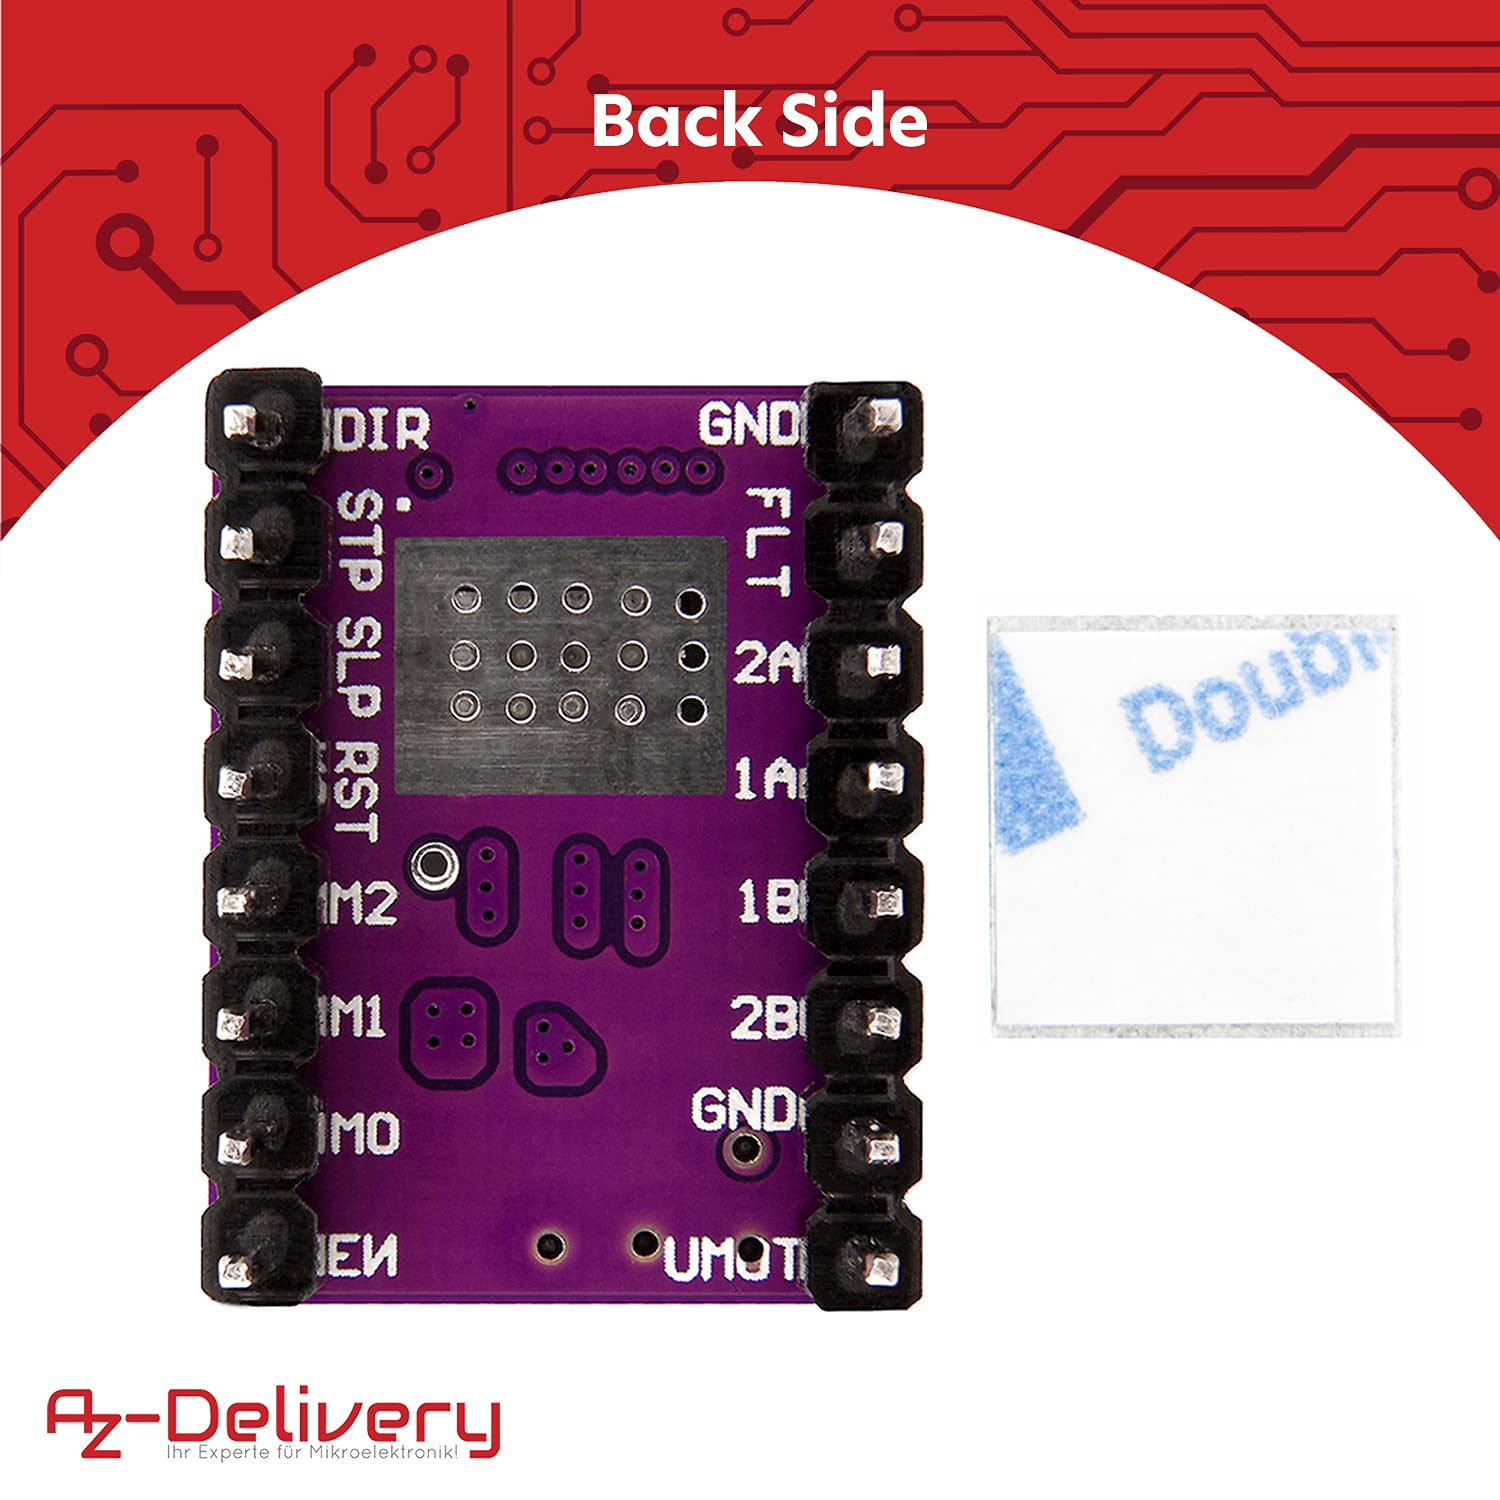 AZDelivery 3 x DRV8825 Stepper Motor Driver Module with Heatsink compatible with Arduino, RAMPS 1.4 / CNC-Shield / 3D printer/Prusa Mendel including E-Book!